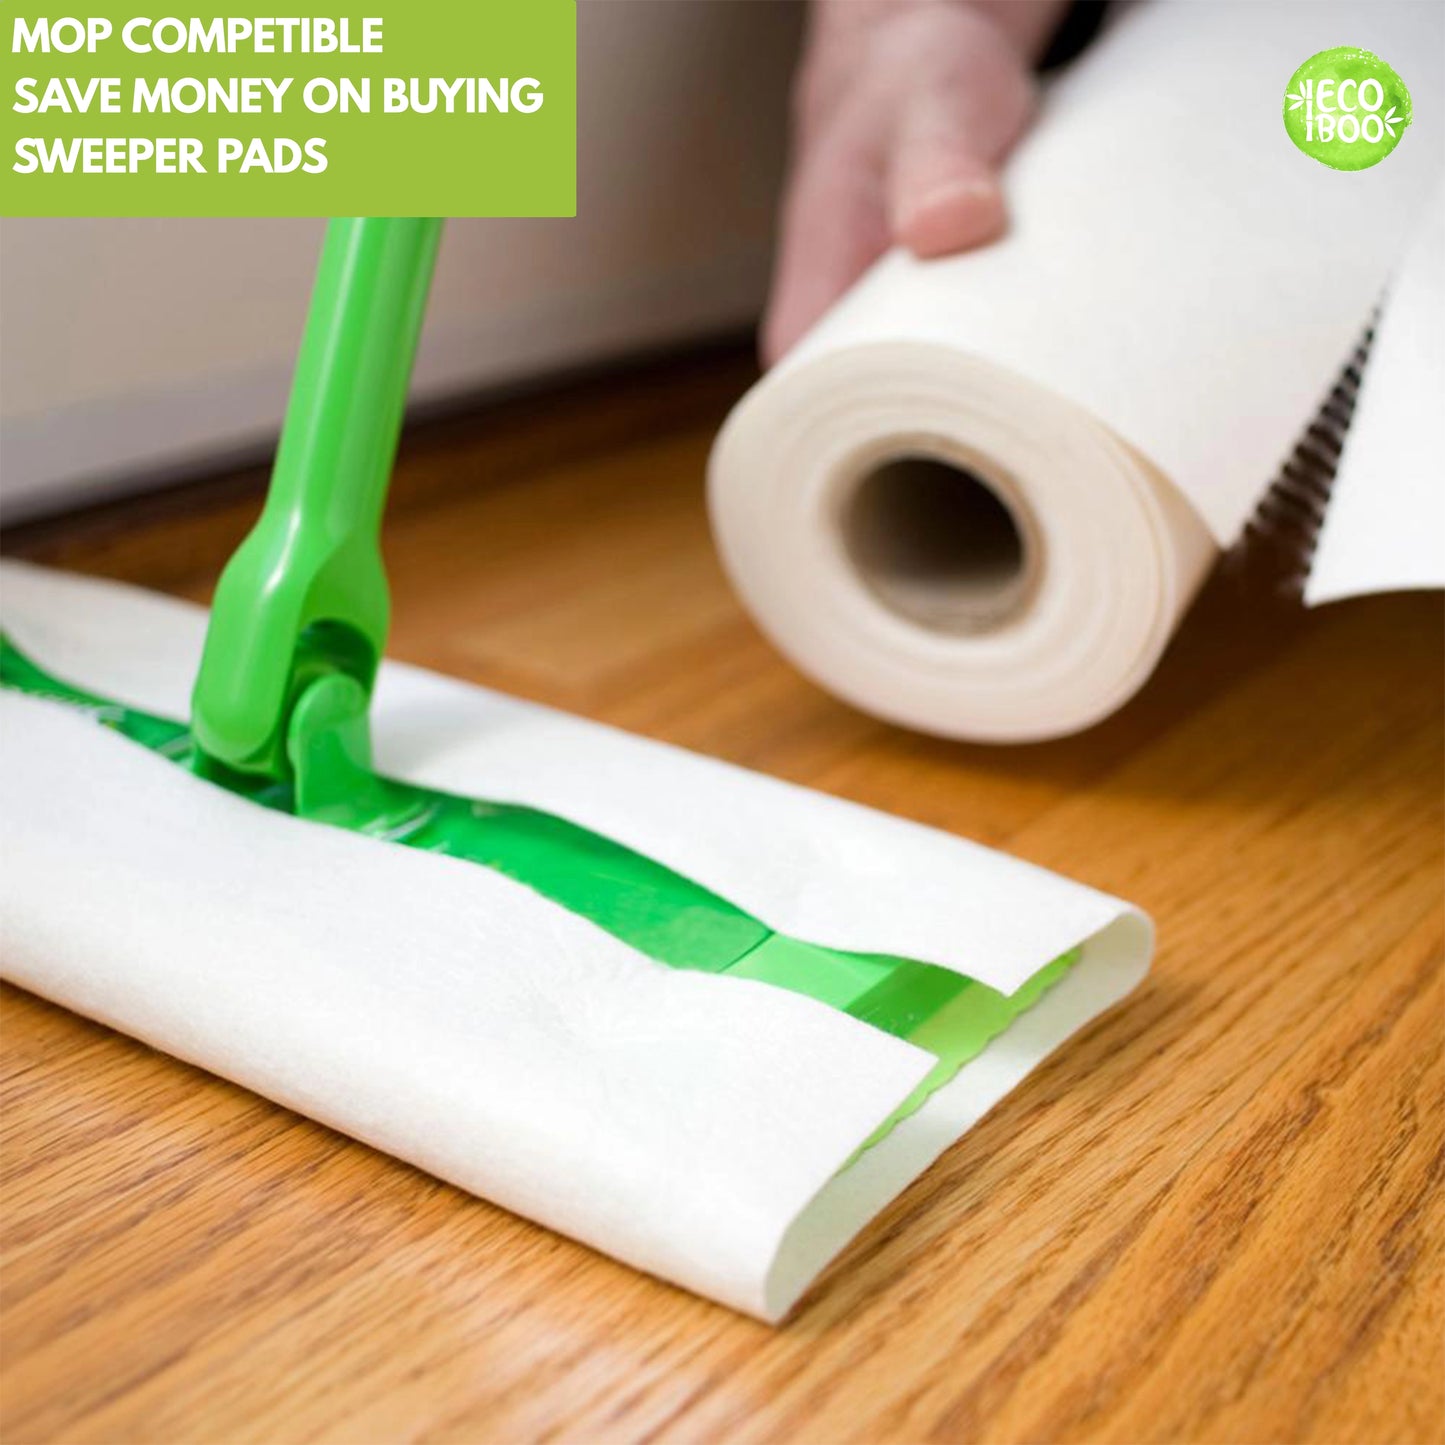 Mop competible save money on buying sweeper pads with reusable paper towels